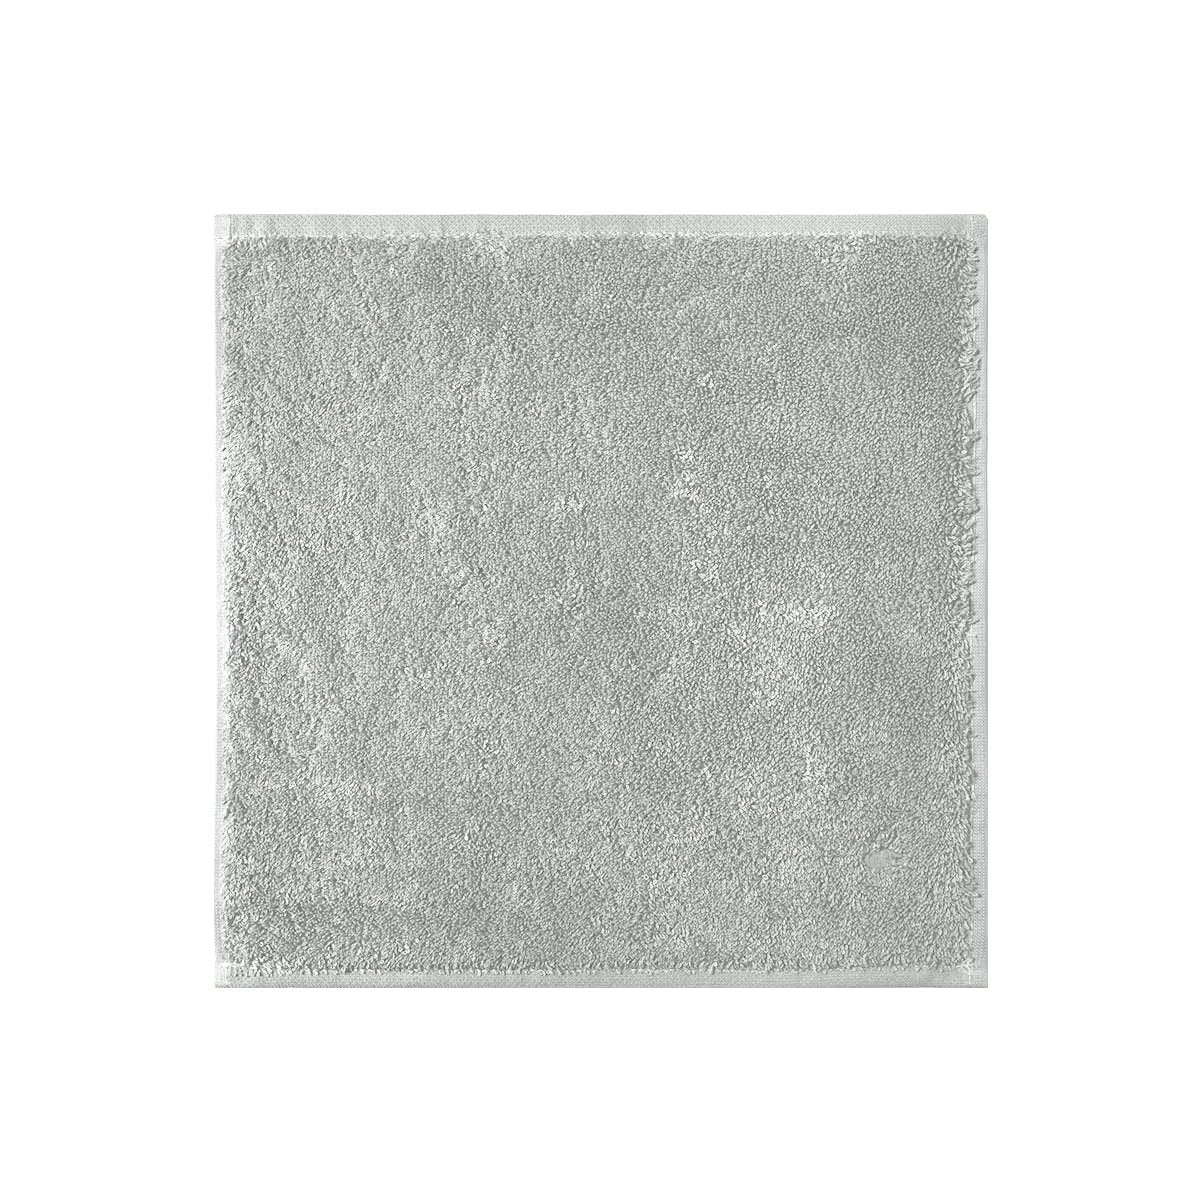 Etoile Platine Bath Collection by Yves Delorme | Fig Linens - Gray bath linen, wash cloth